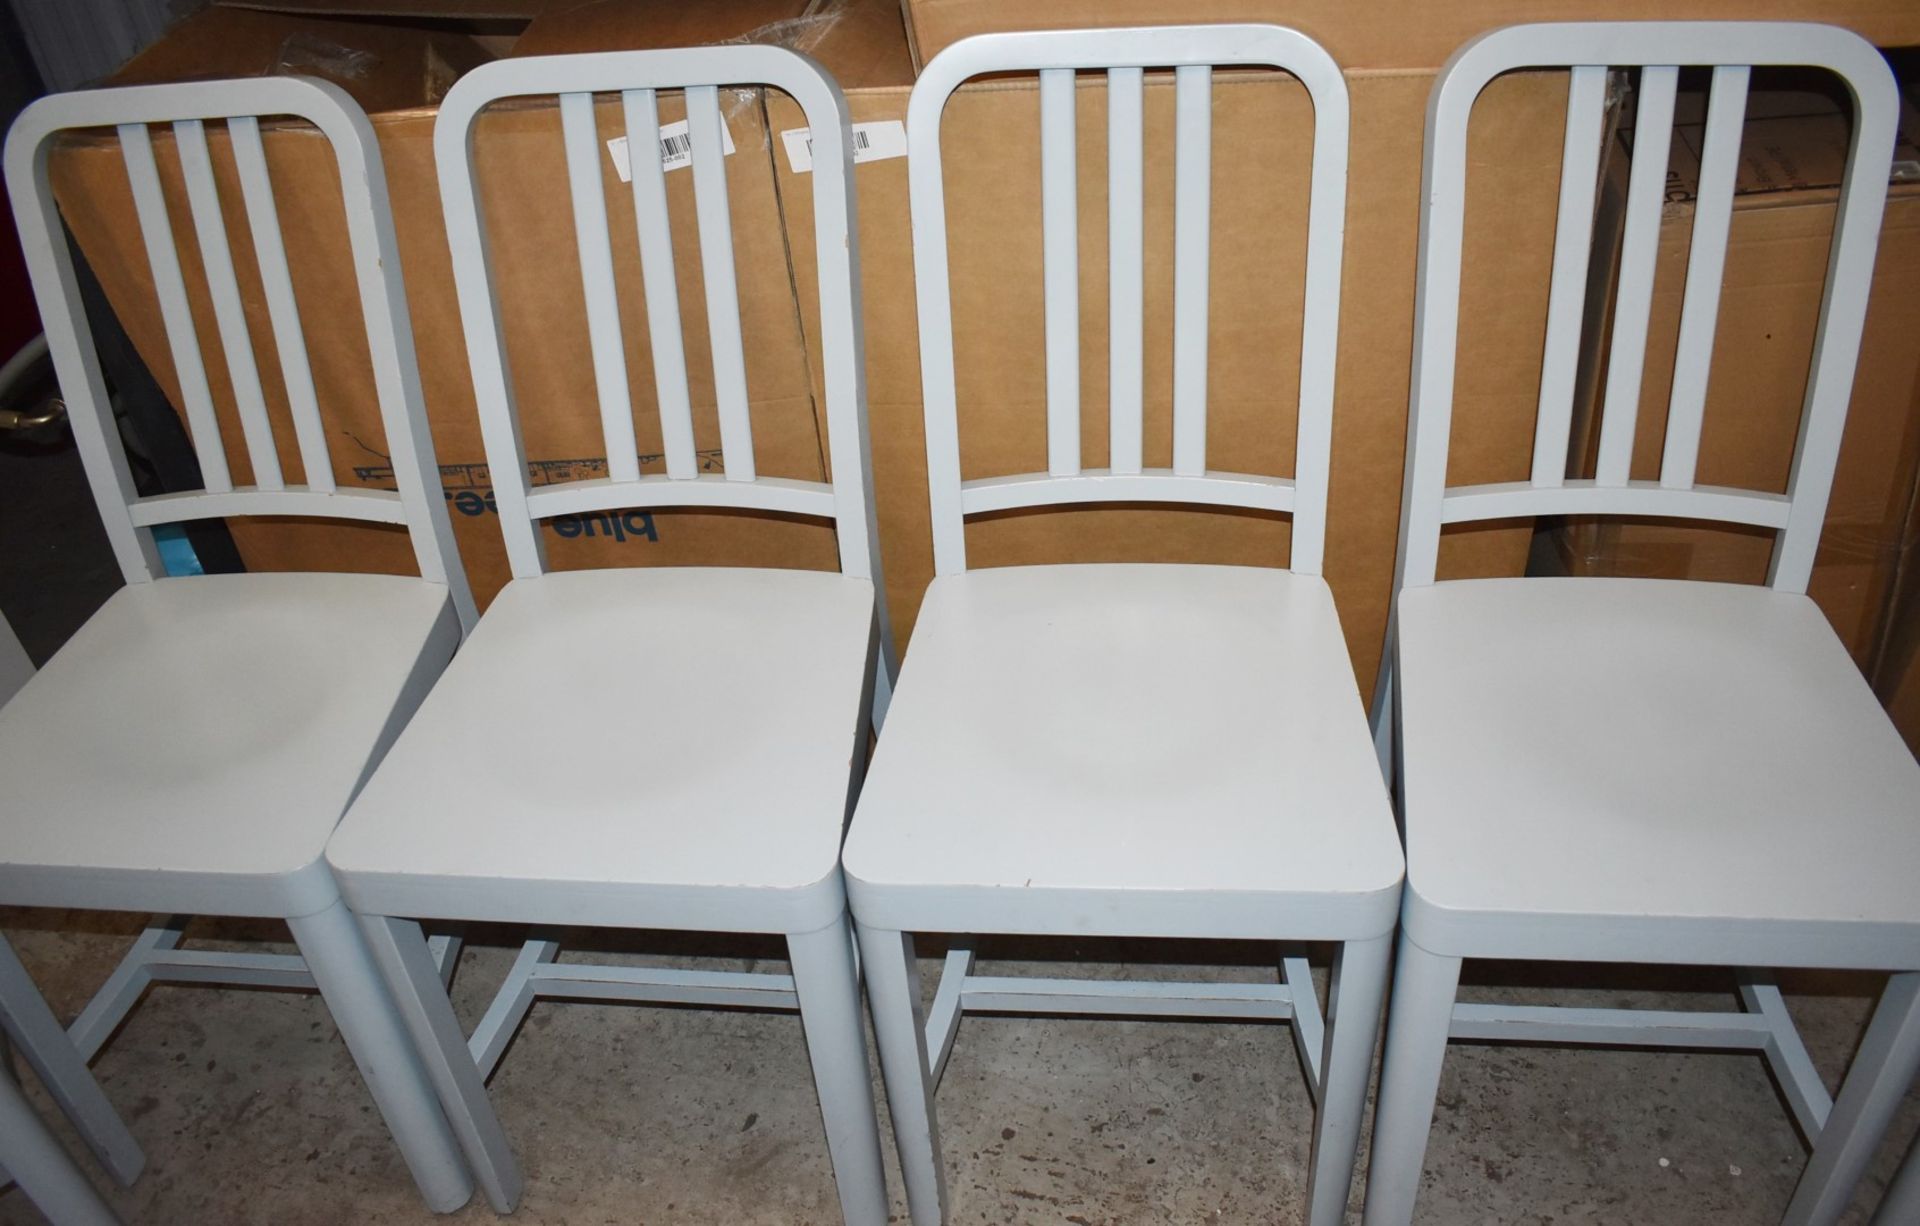 6 x Designer Billiani CO2 Contemporary Wooden Dining Chairs - Designed By Aldo Cibic - Made in Italy - Image 5 of 15